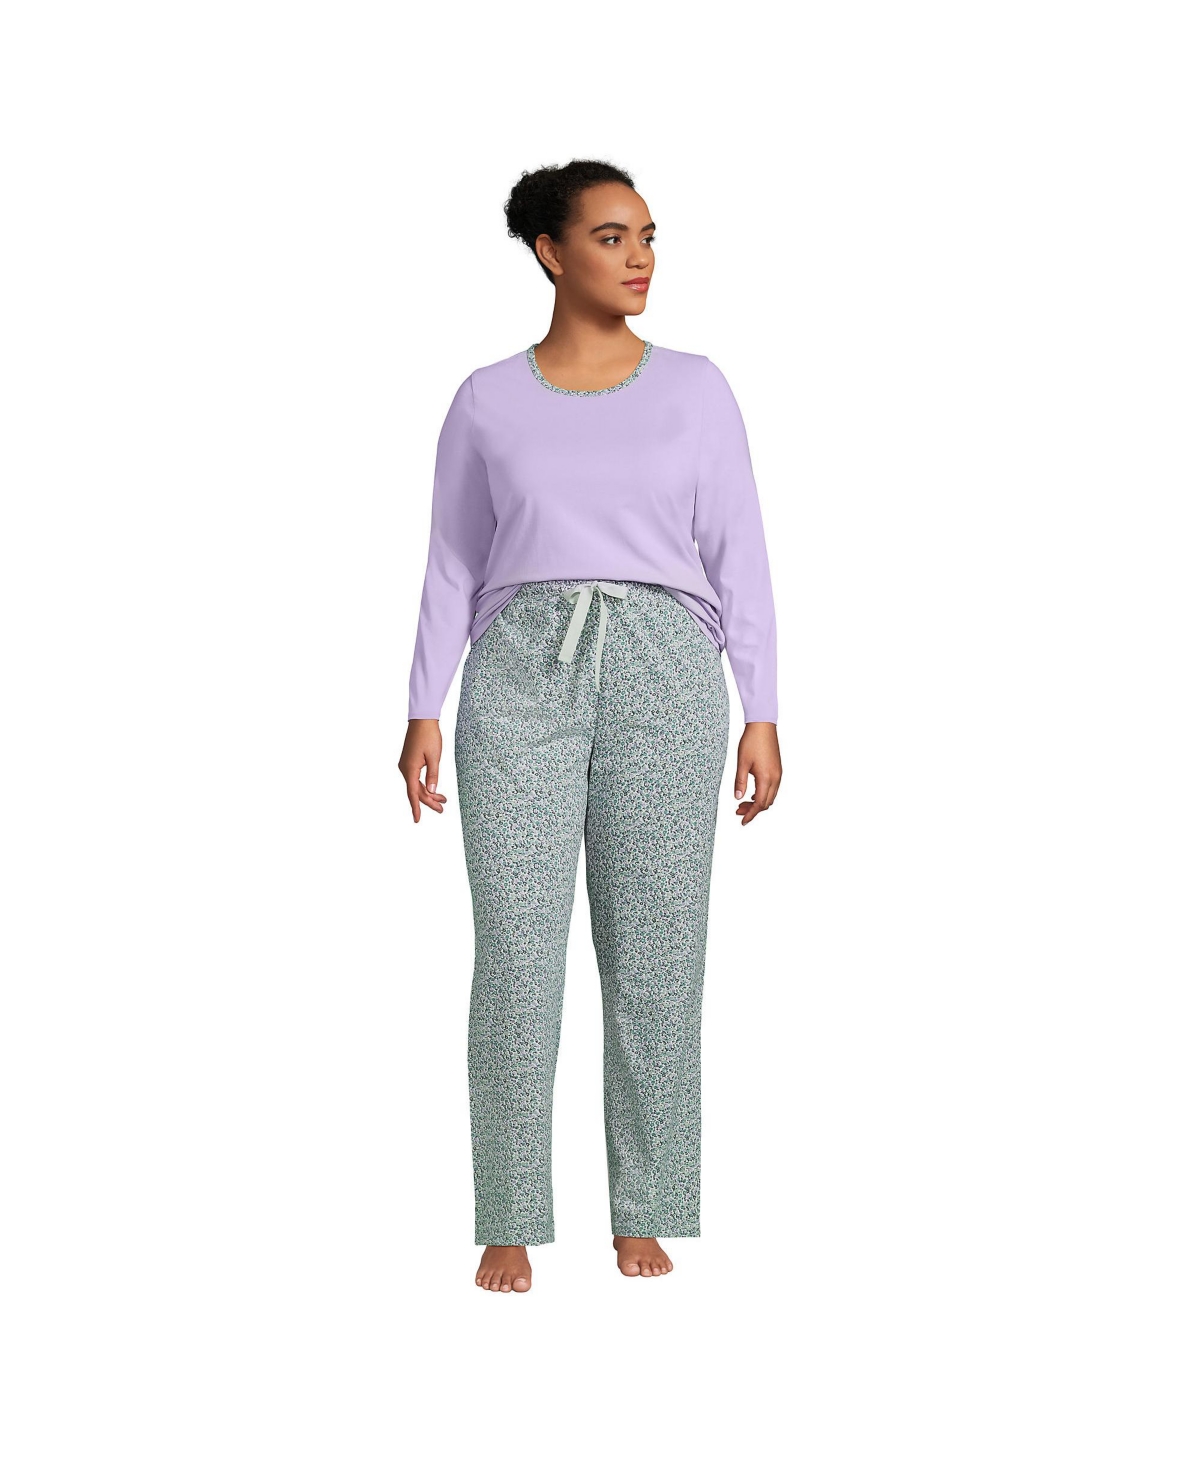 Lands' End Women's Tall Knit Pajama Set Long Sleeve T-shirt And